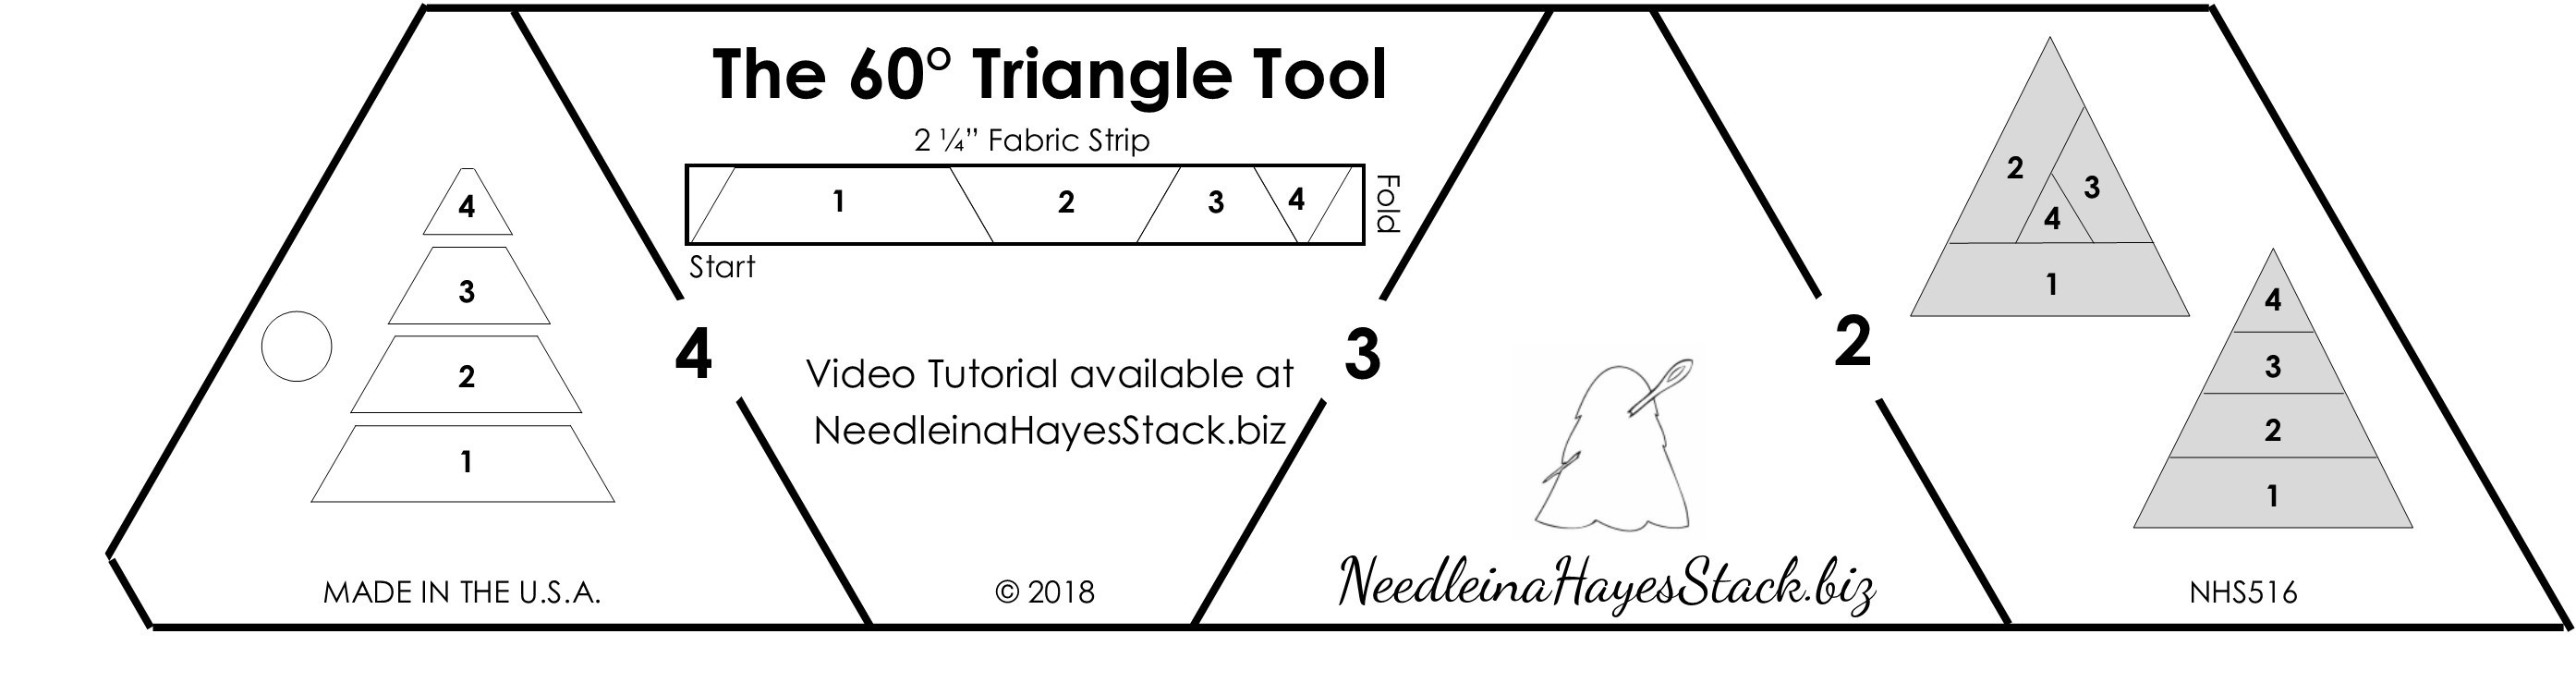 equilateral triangle tool on gsp5